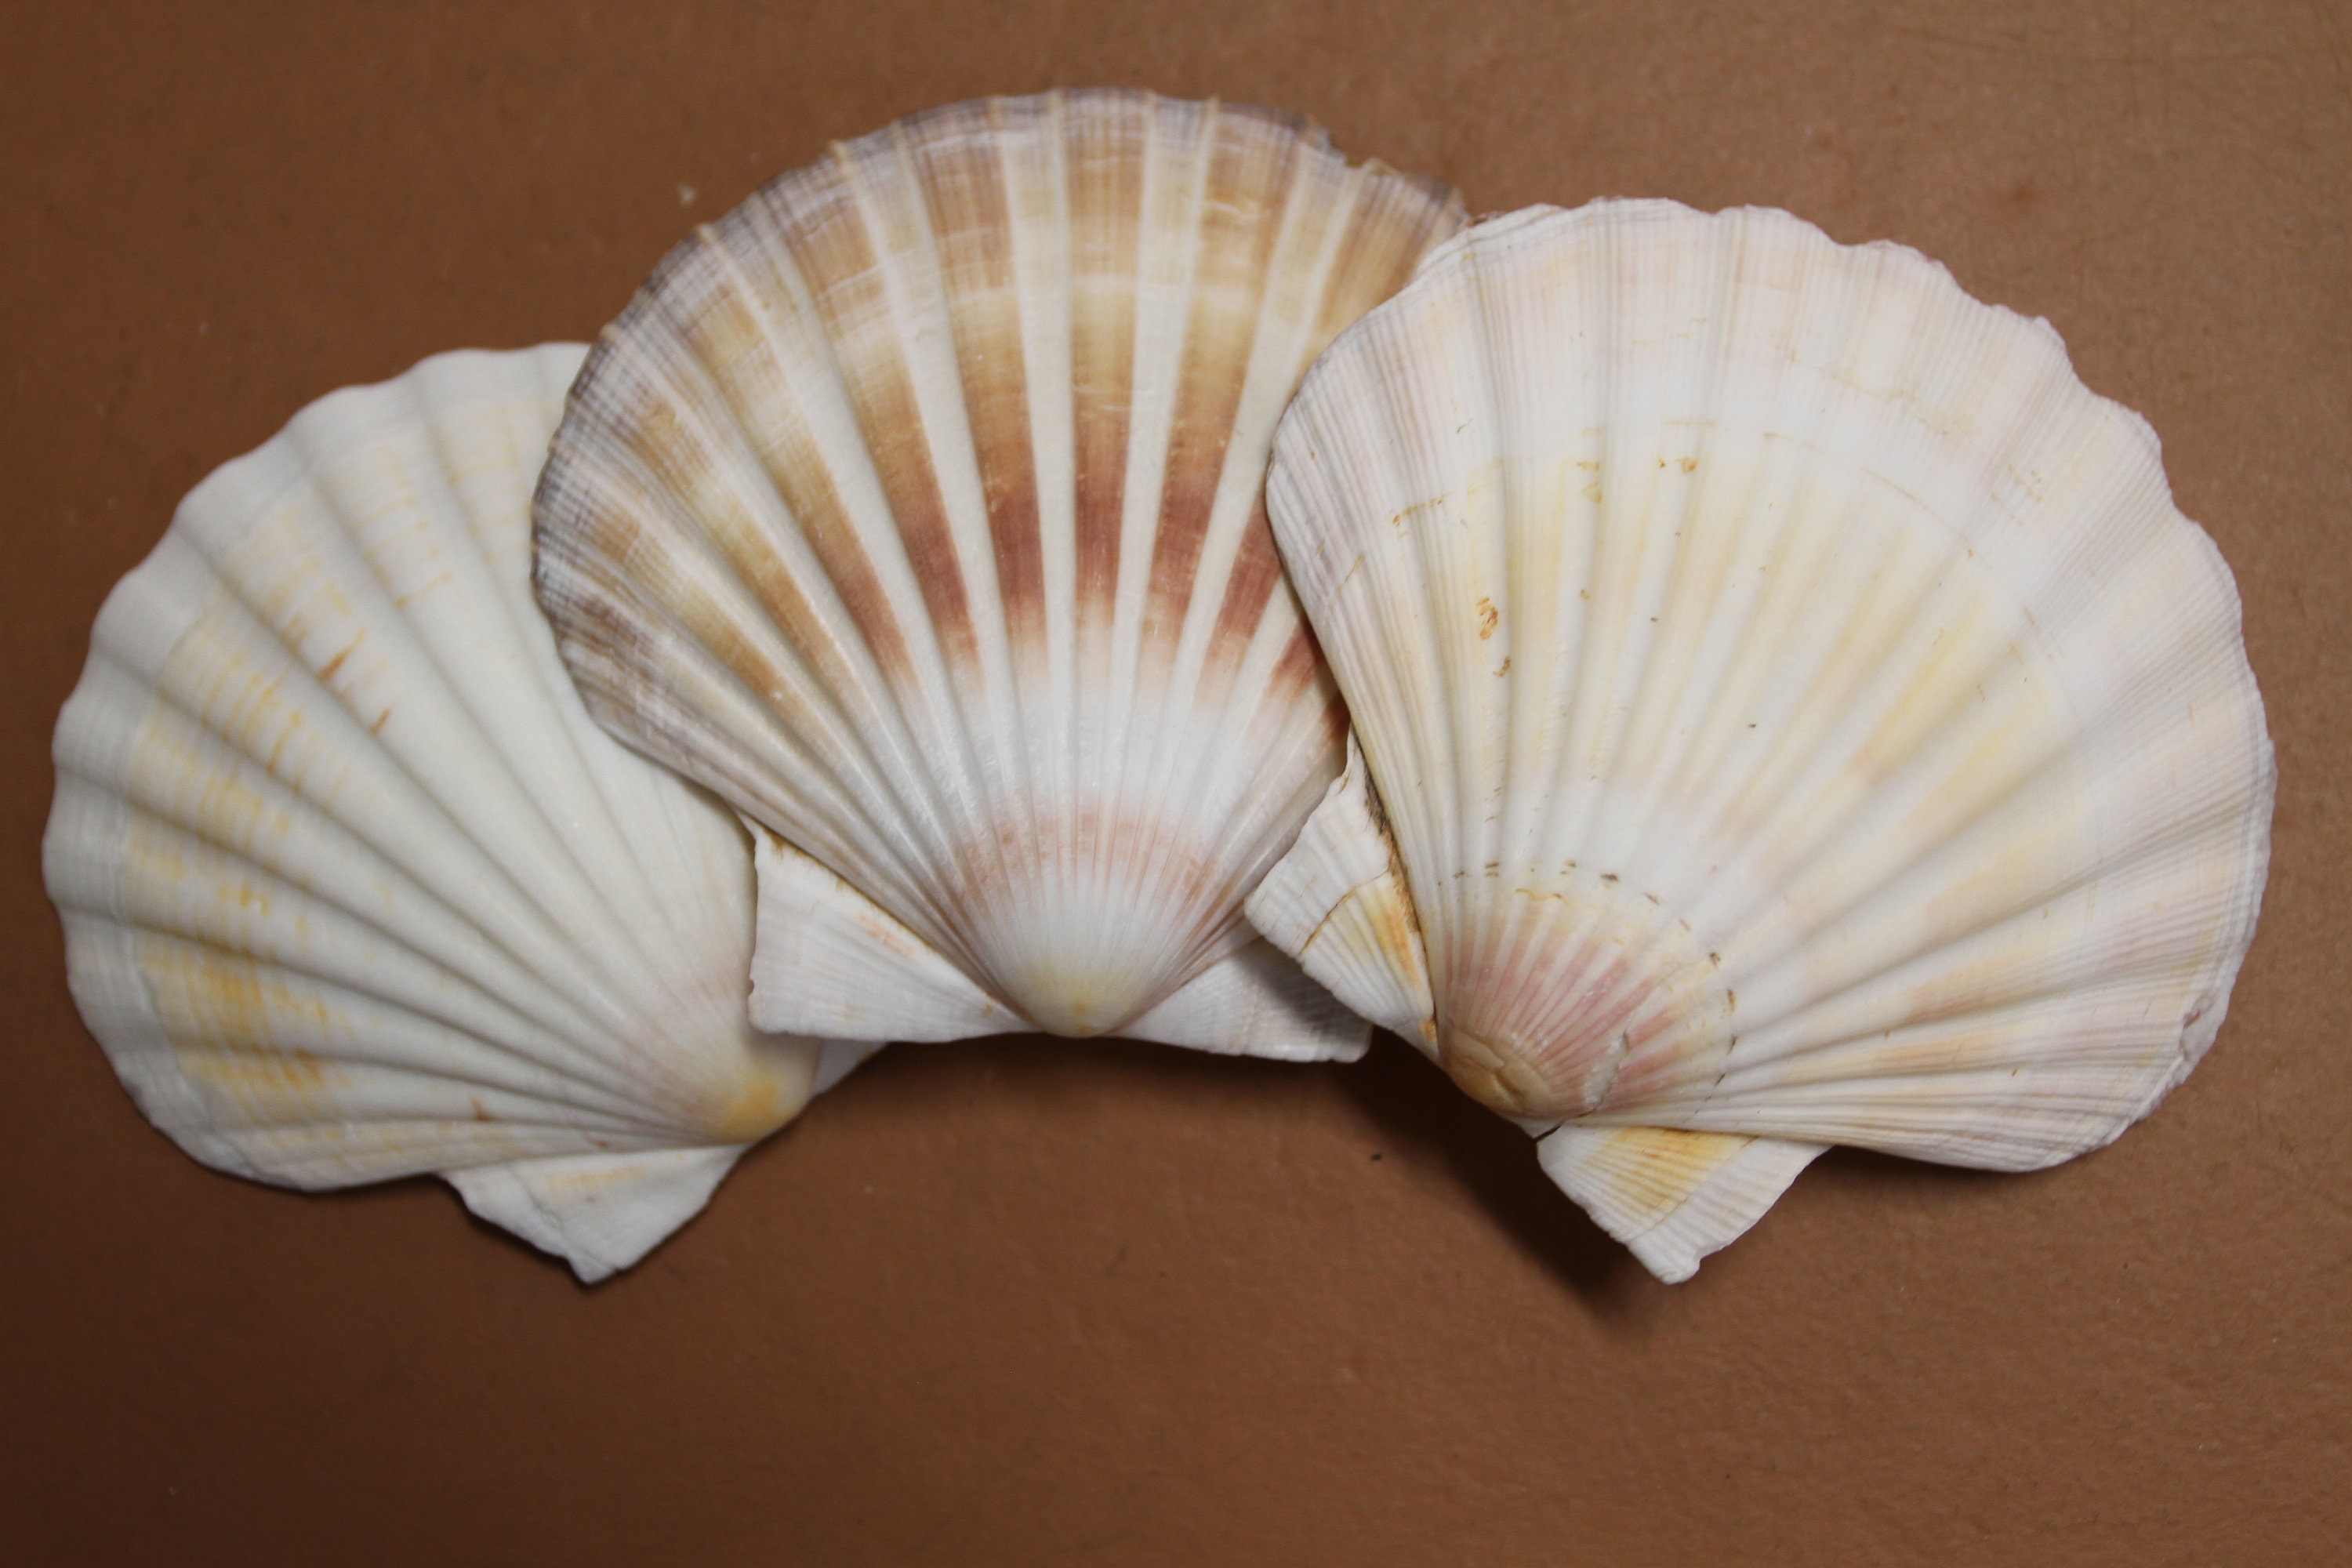 Yellow Cup Scallop Shells - Mexican Pecten Vogdesi - (4 shells approx.  2.5-3 inches)